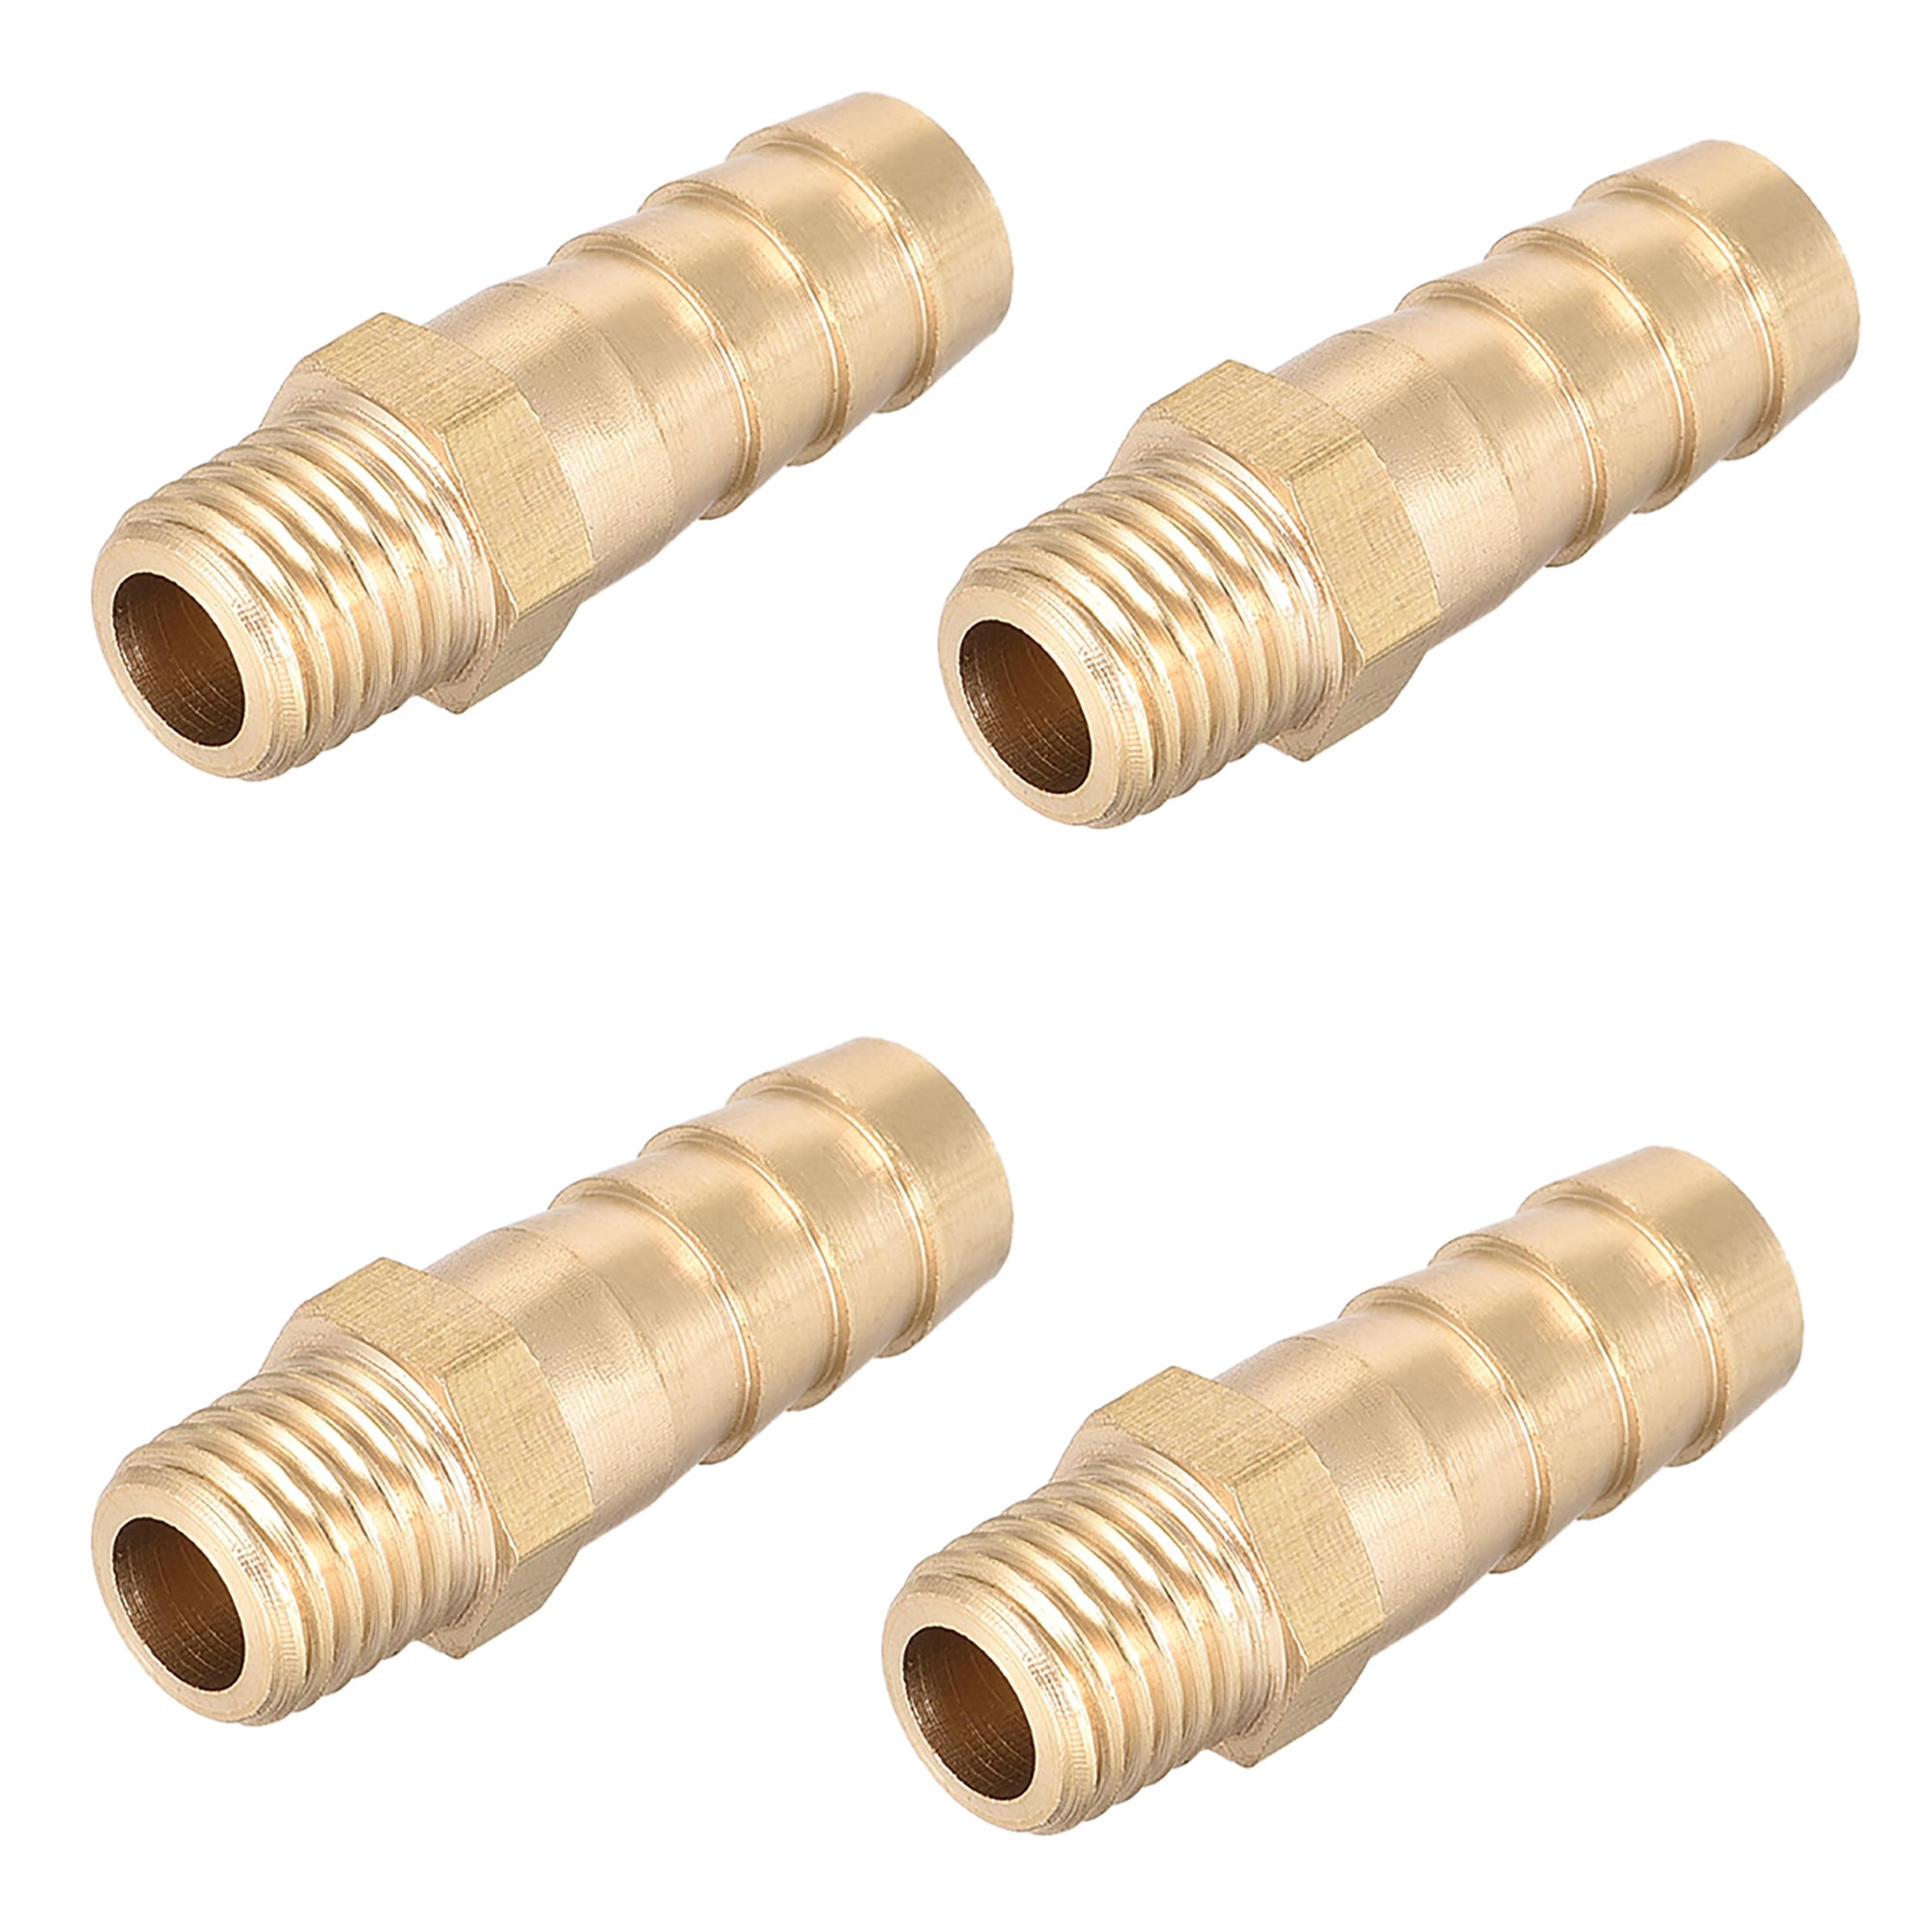 Pipe Fittings Brass Fitting Connector Metric M10x1.25 Male to Barb Hose ID 10mm 4pcs 